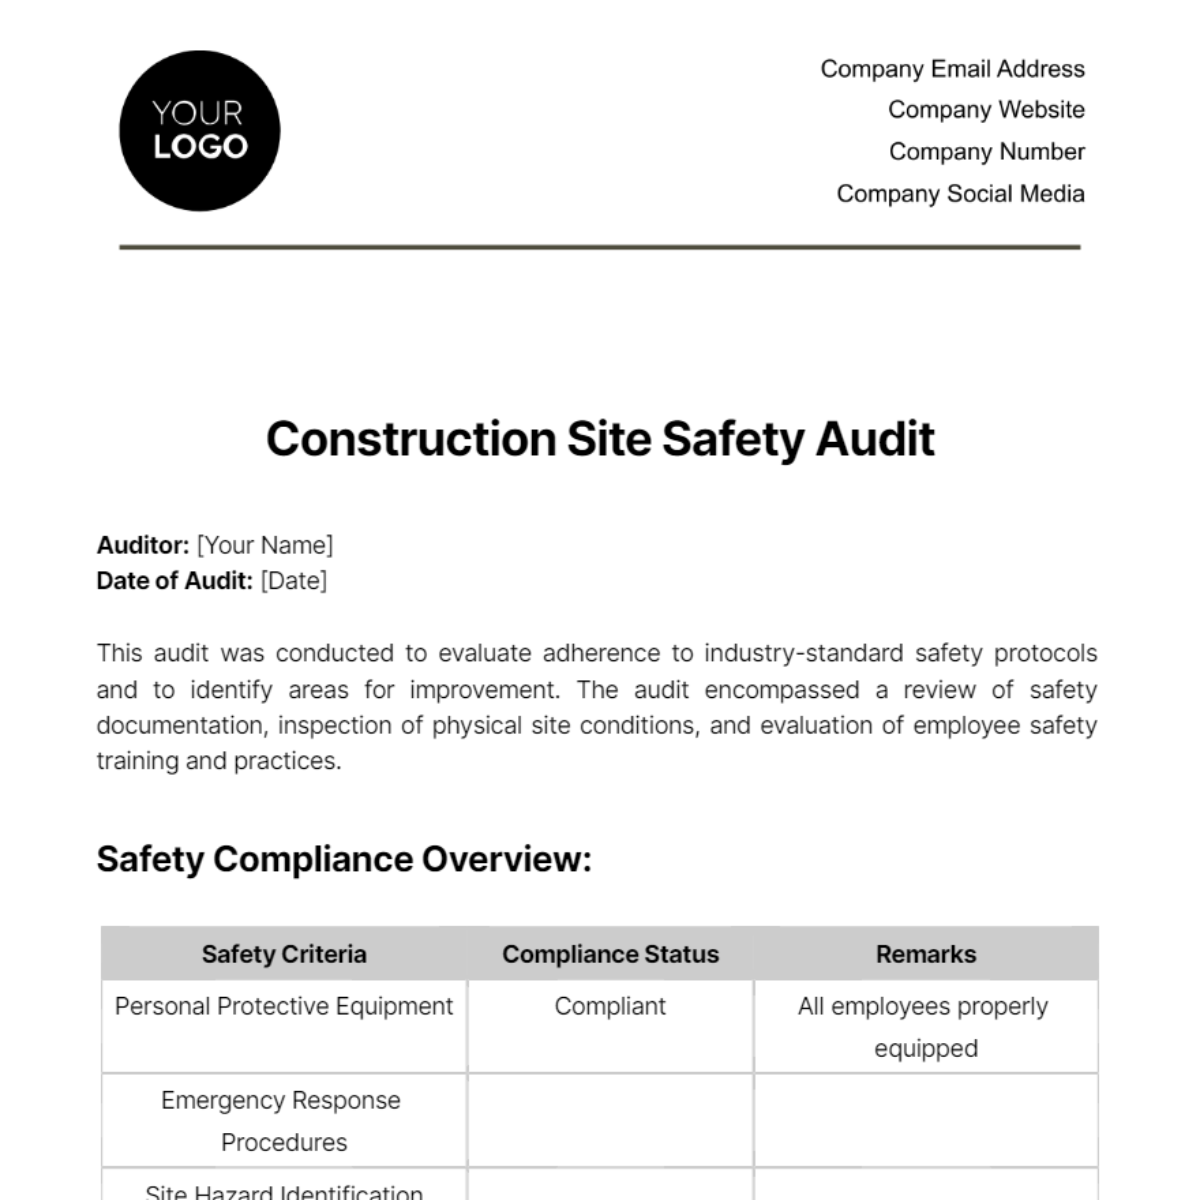 Construction Site Safety Audit Template